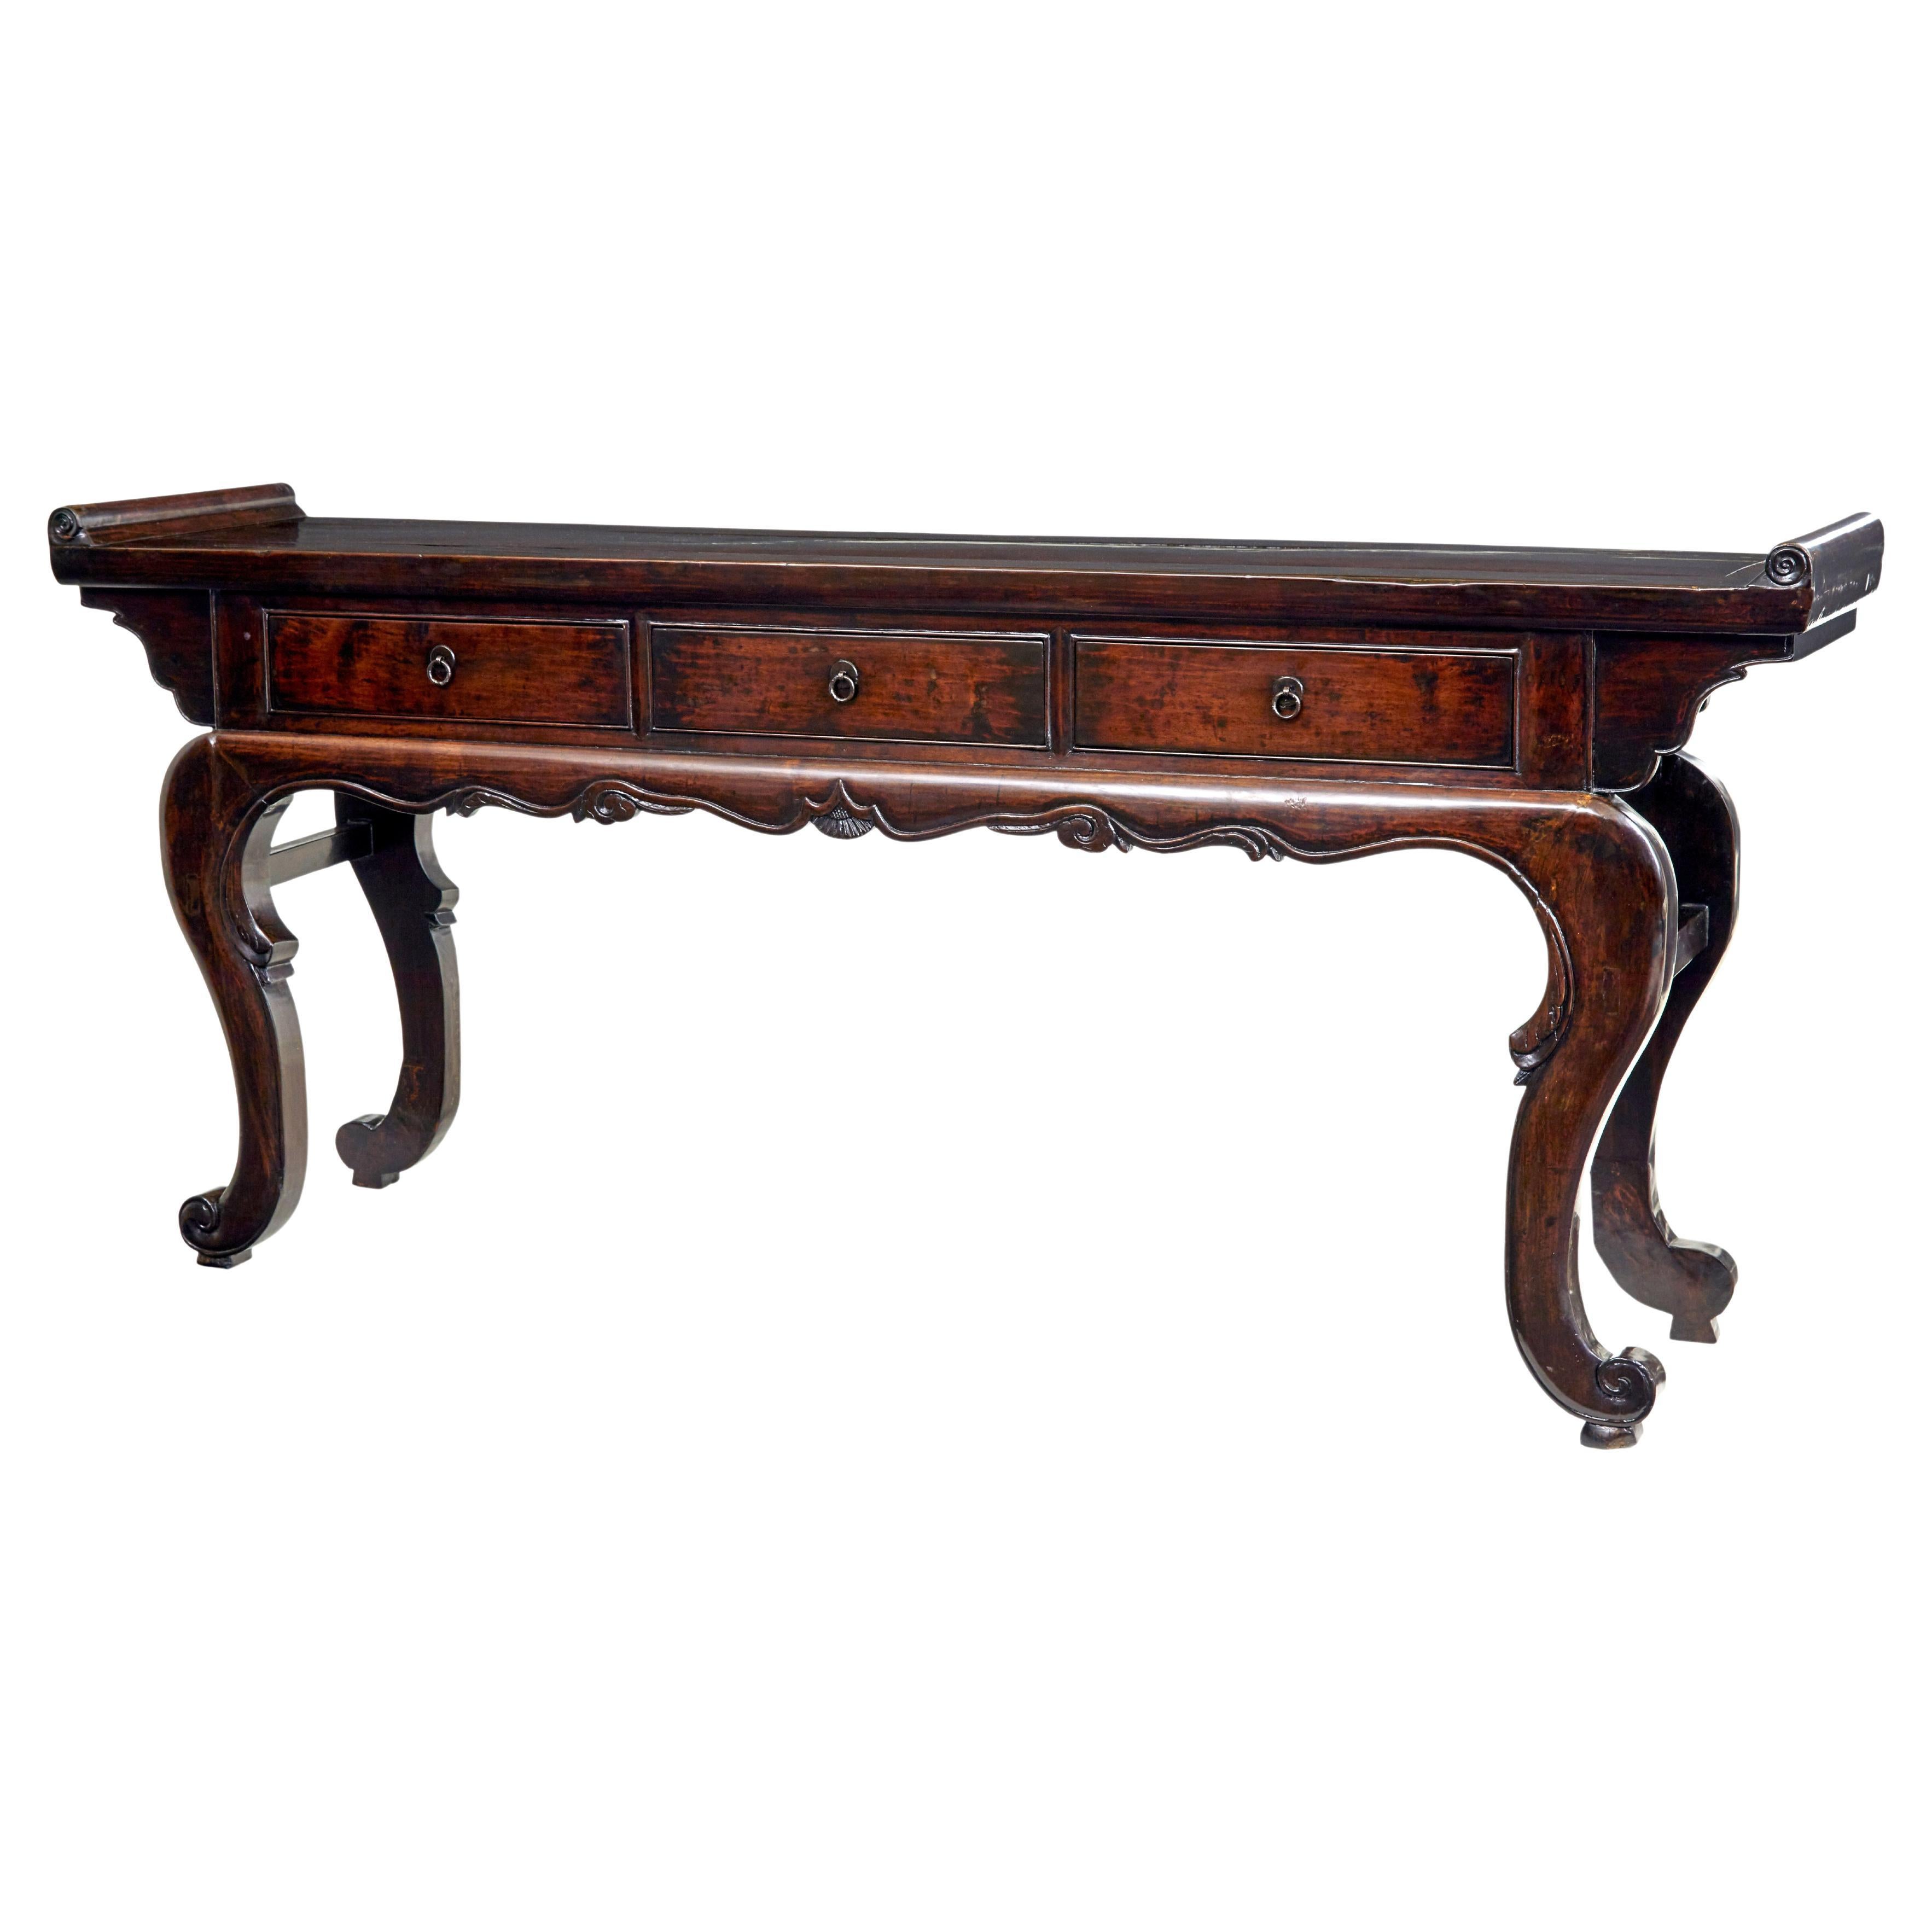 19th century Chinese lacquered hardwood sideboard